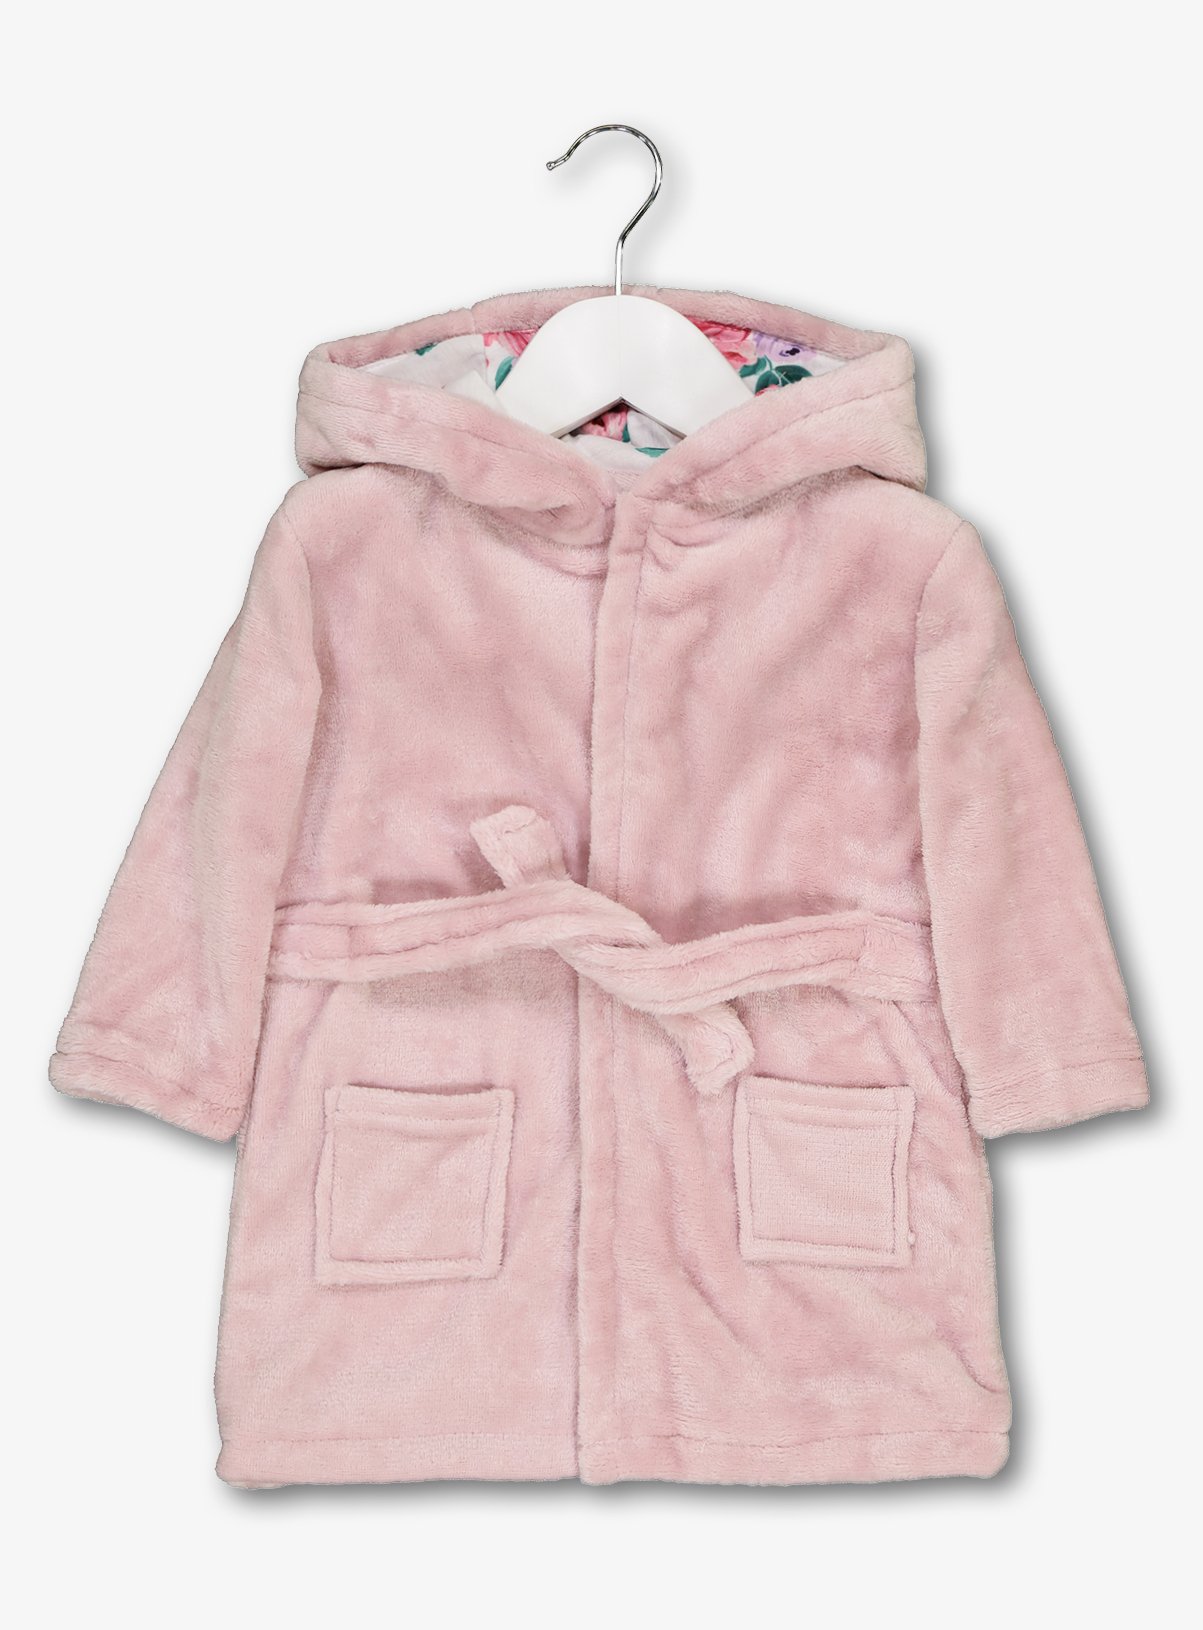 sainsburys baby dressing gown